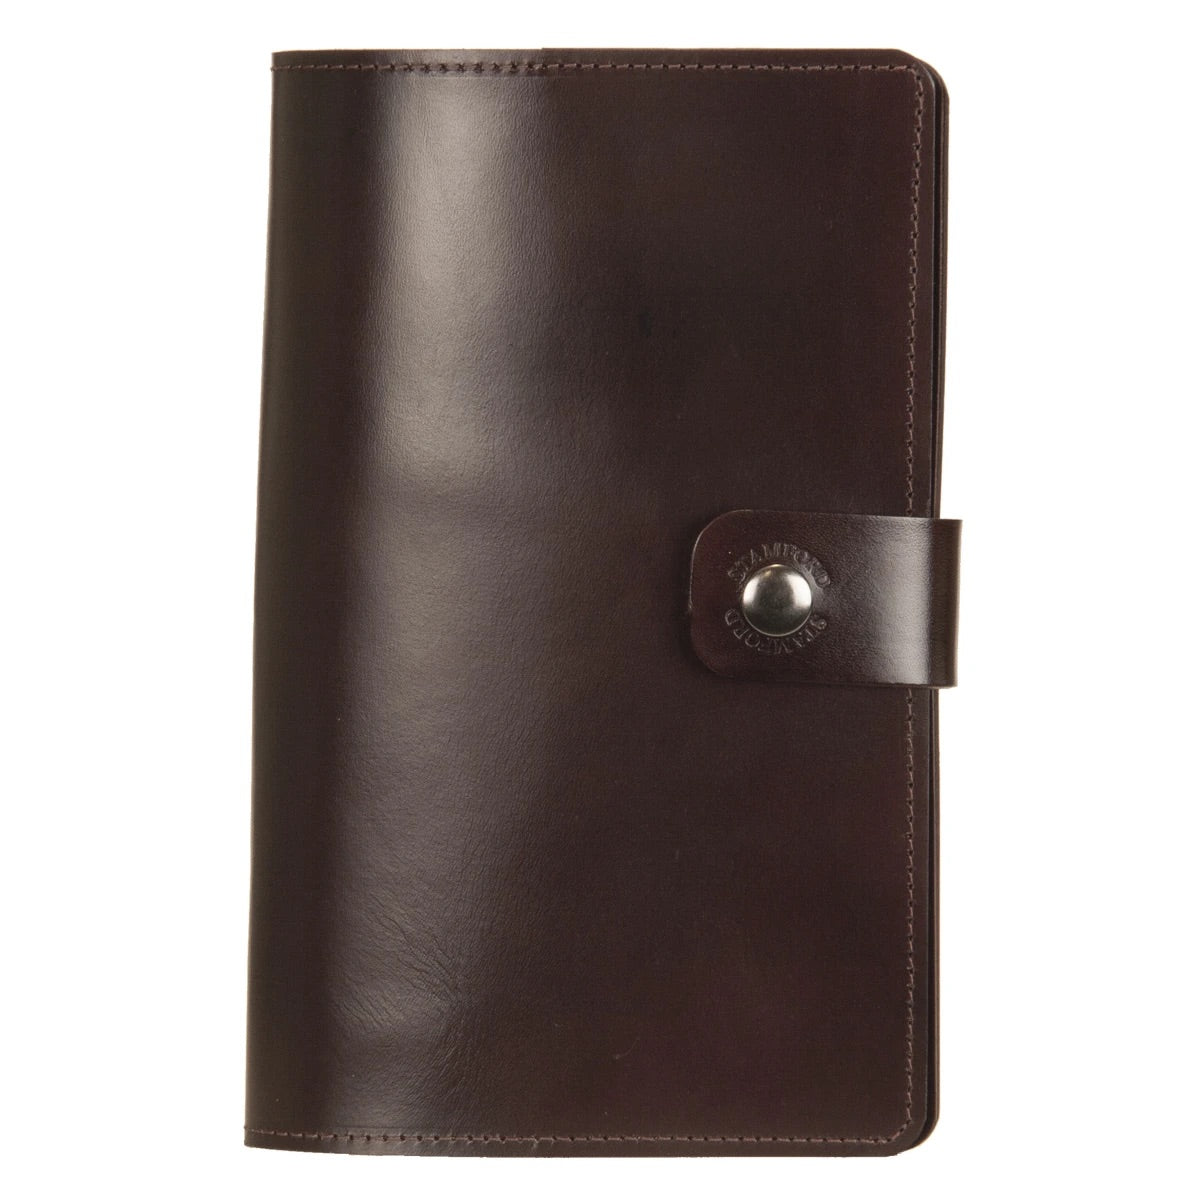 The Burghley Refillable Leather Journal